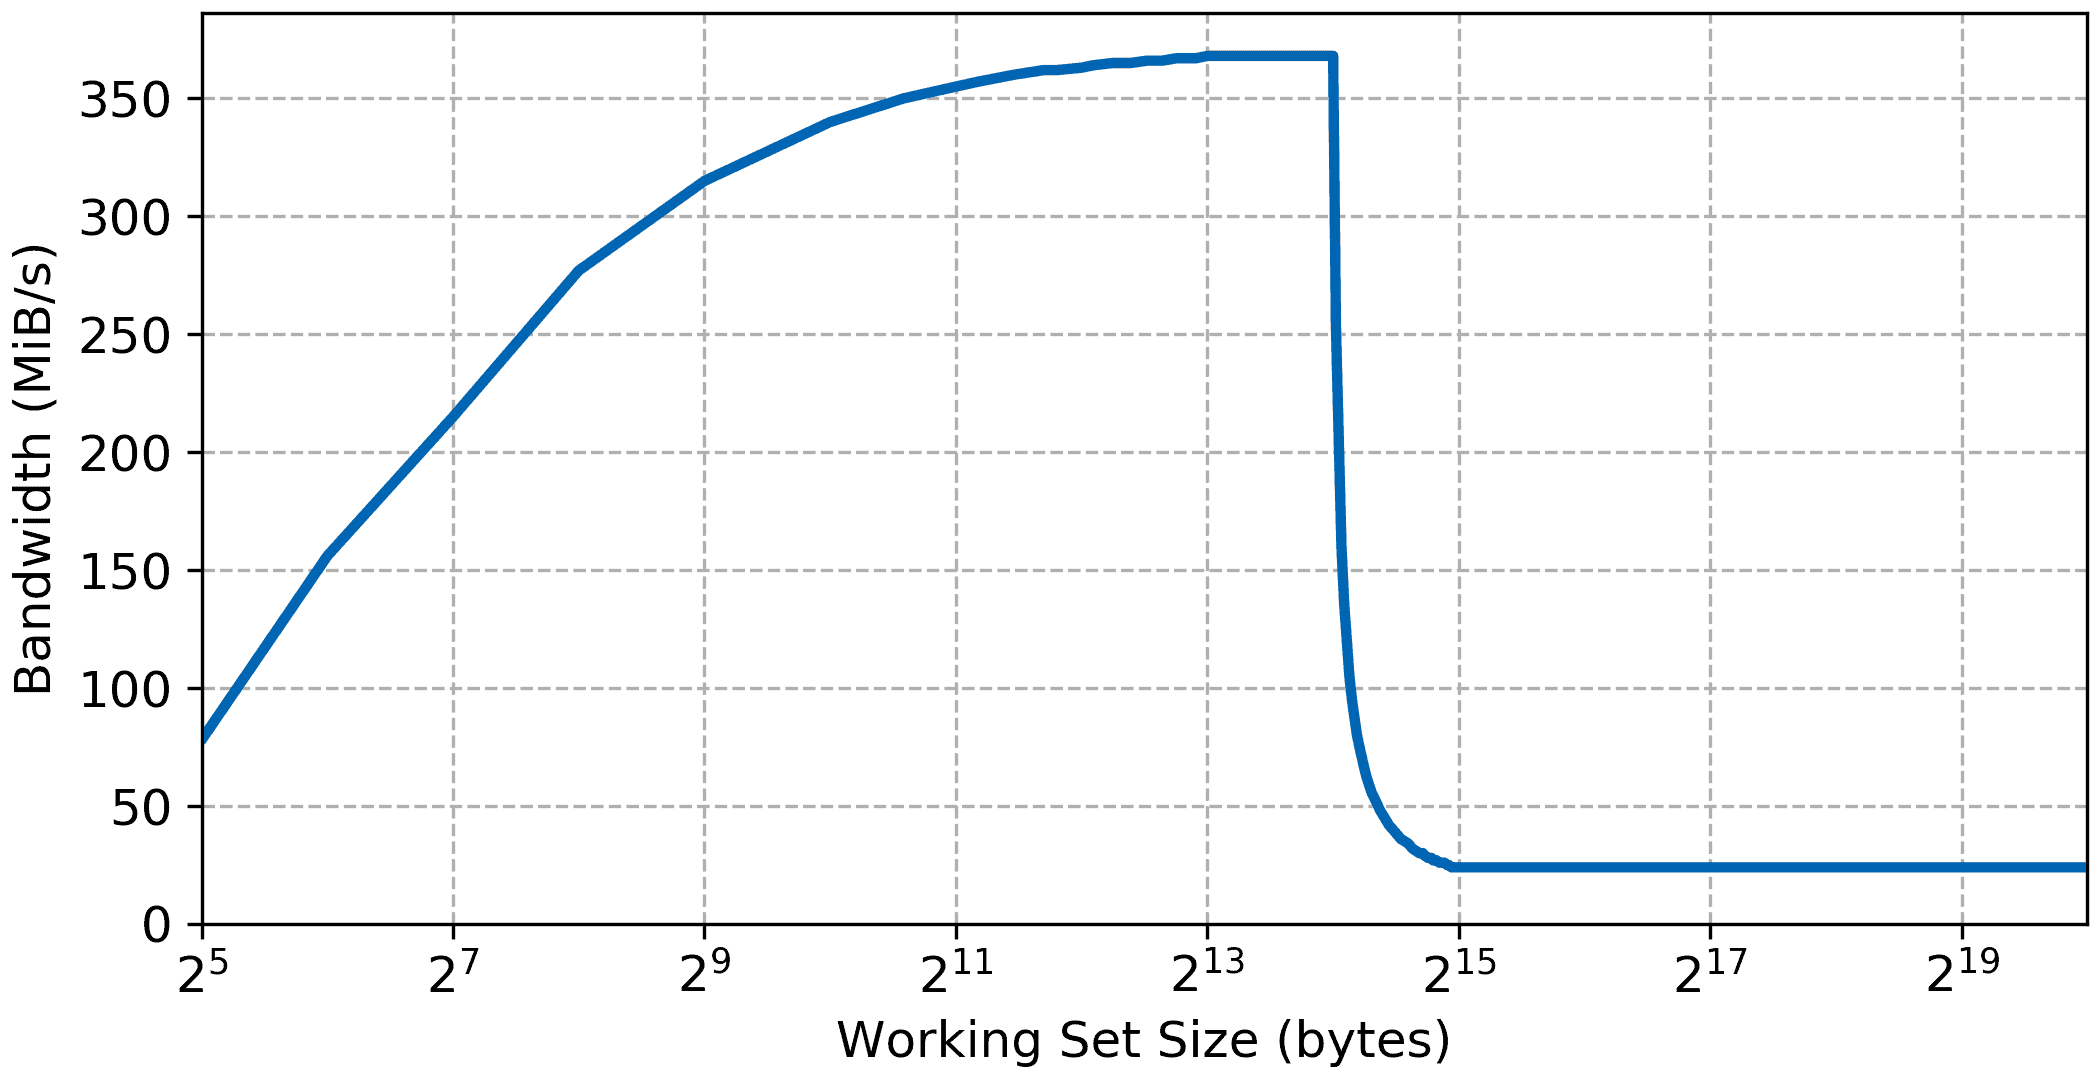 Plot of the Microblaze memory read bandwidth versus the working set size when running from external DDR SDRAM memory with 16KiB of level 1 cache.